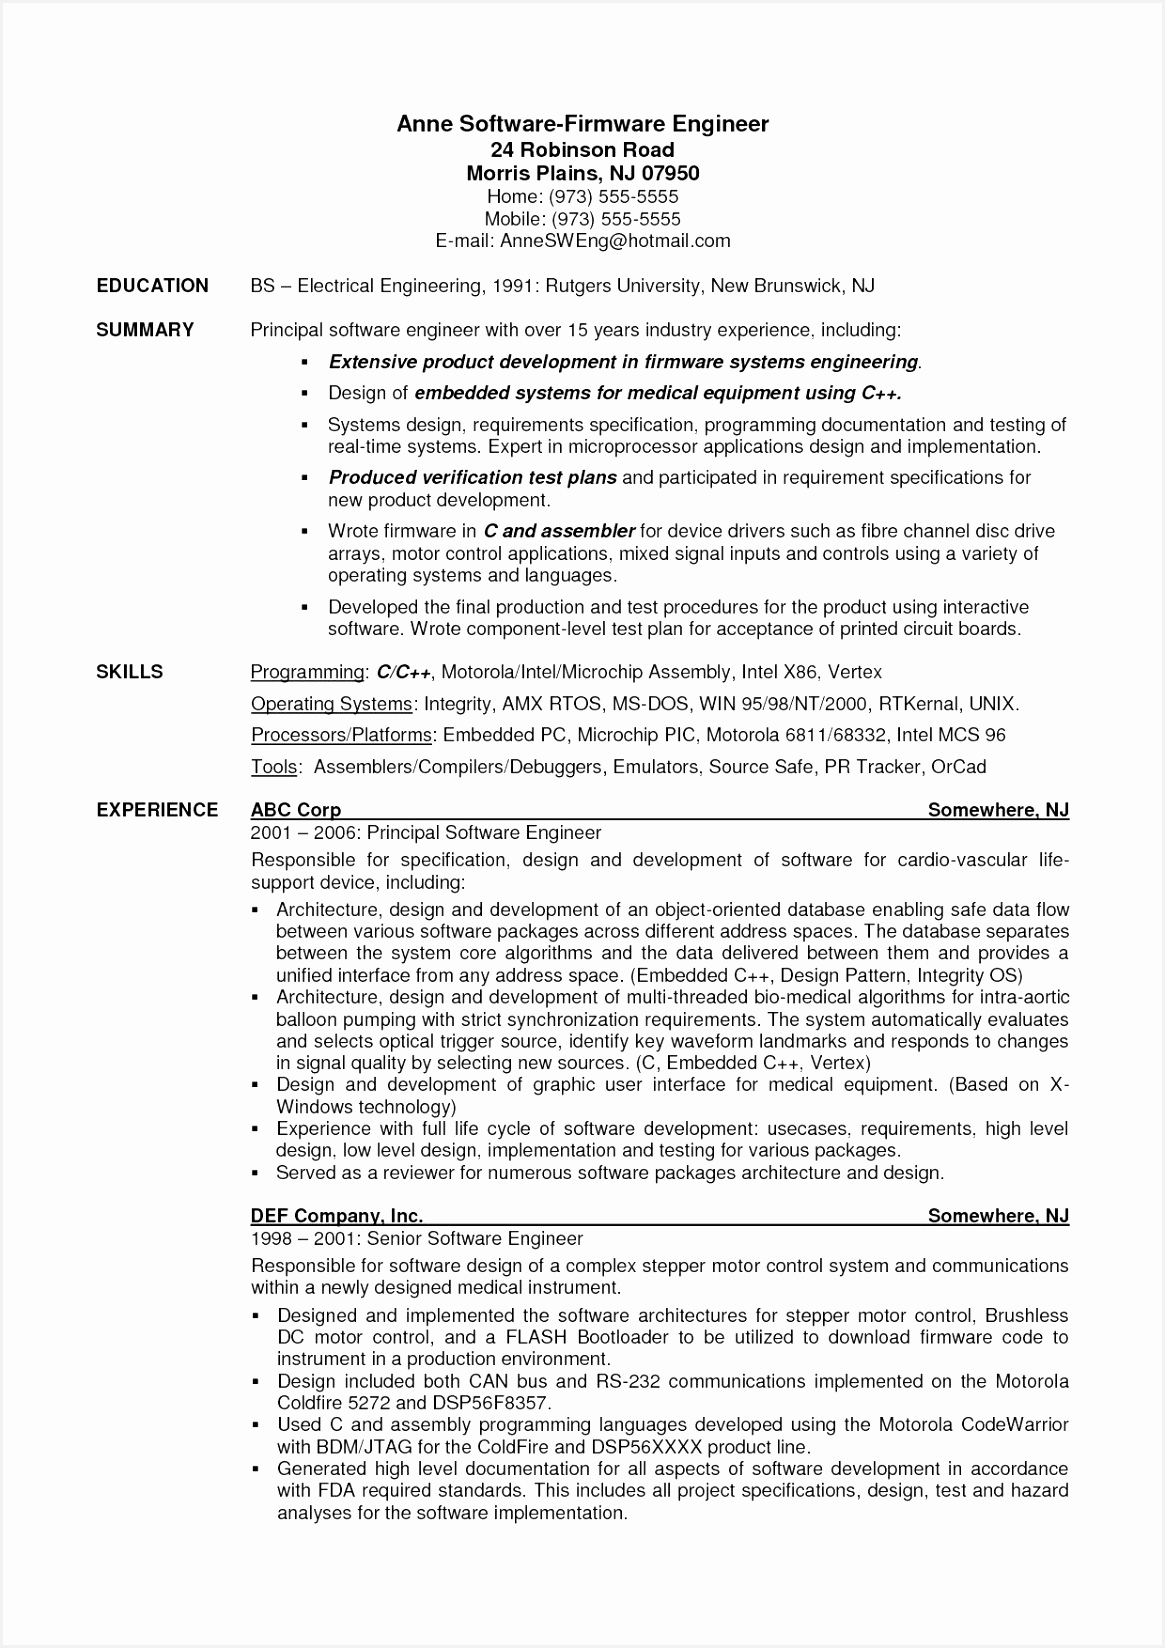 Resume Template for software Engineer New Resume Samples for software Engineers Intern Resume Sample Fresh 164811659rosn